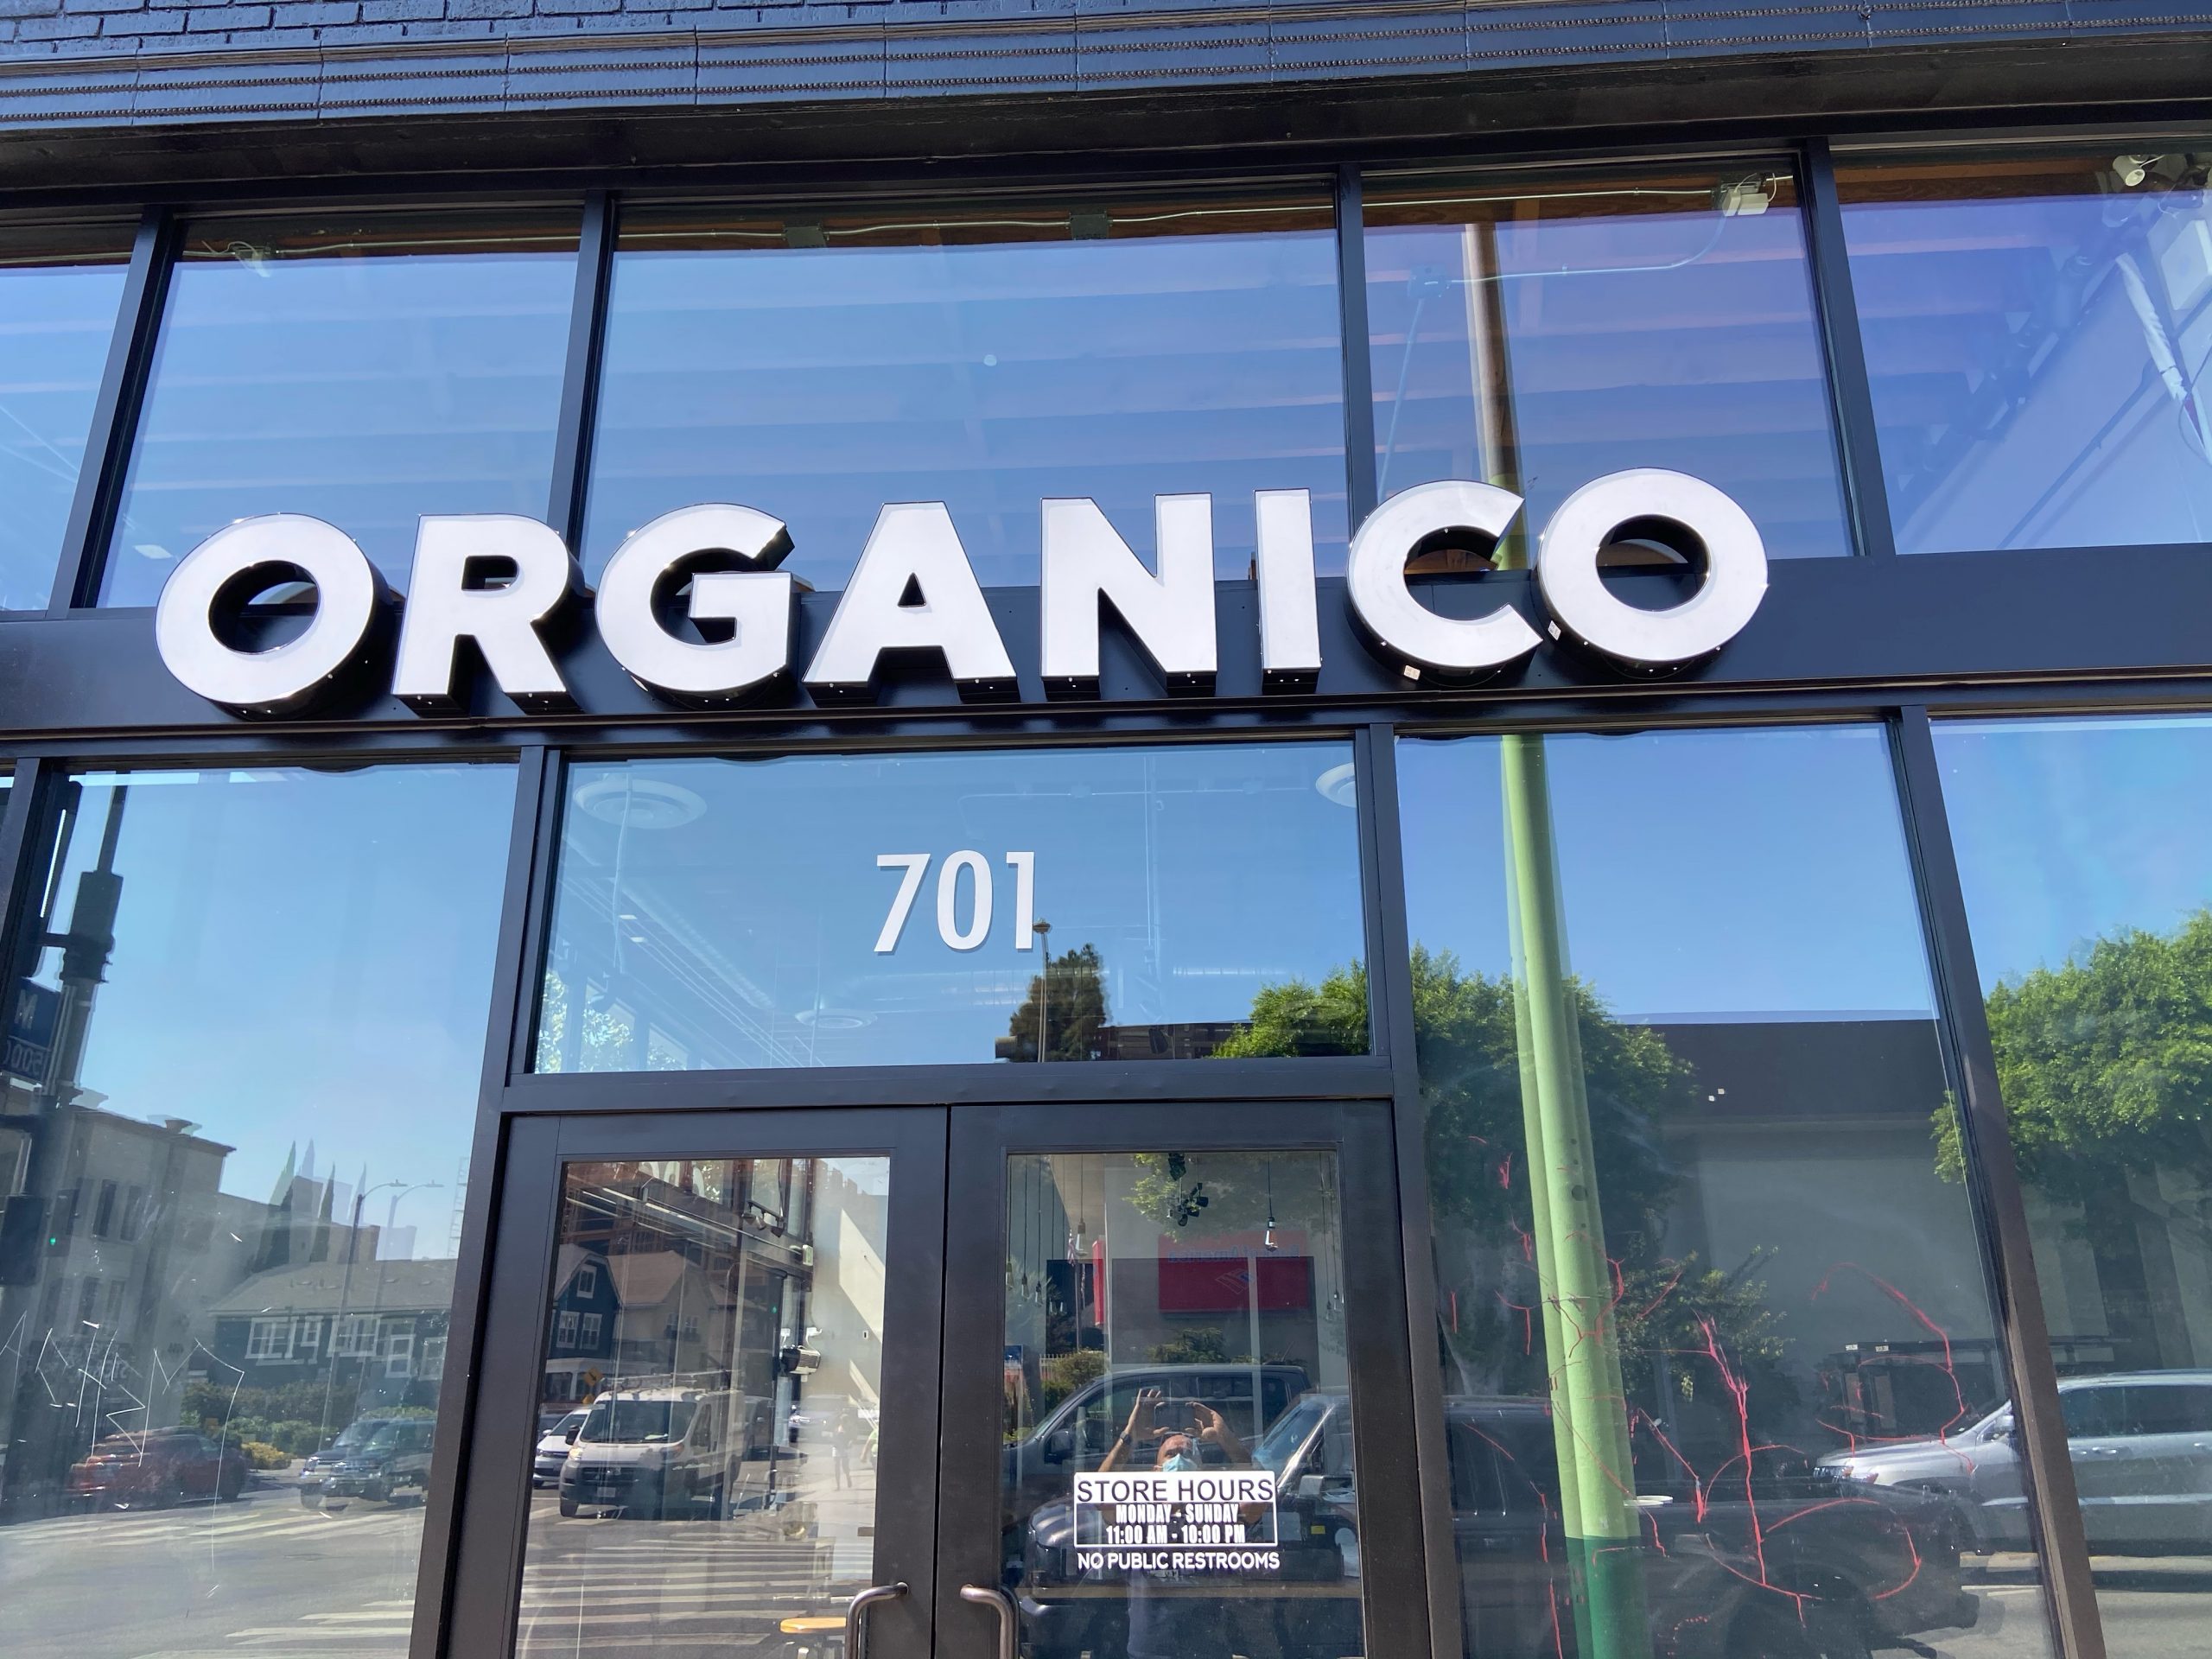 Two sets of front-lit restaurant channel letters we built and installed for Organico, the Los Angeles delivery and take-out only restaurant.